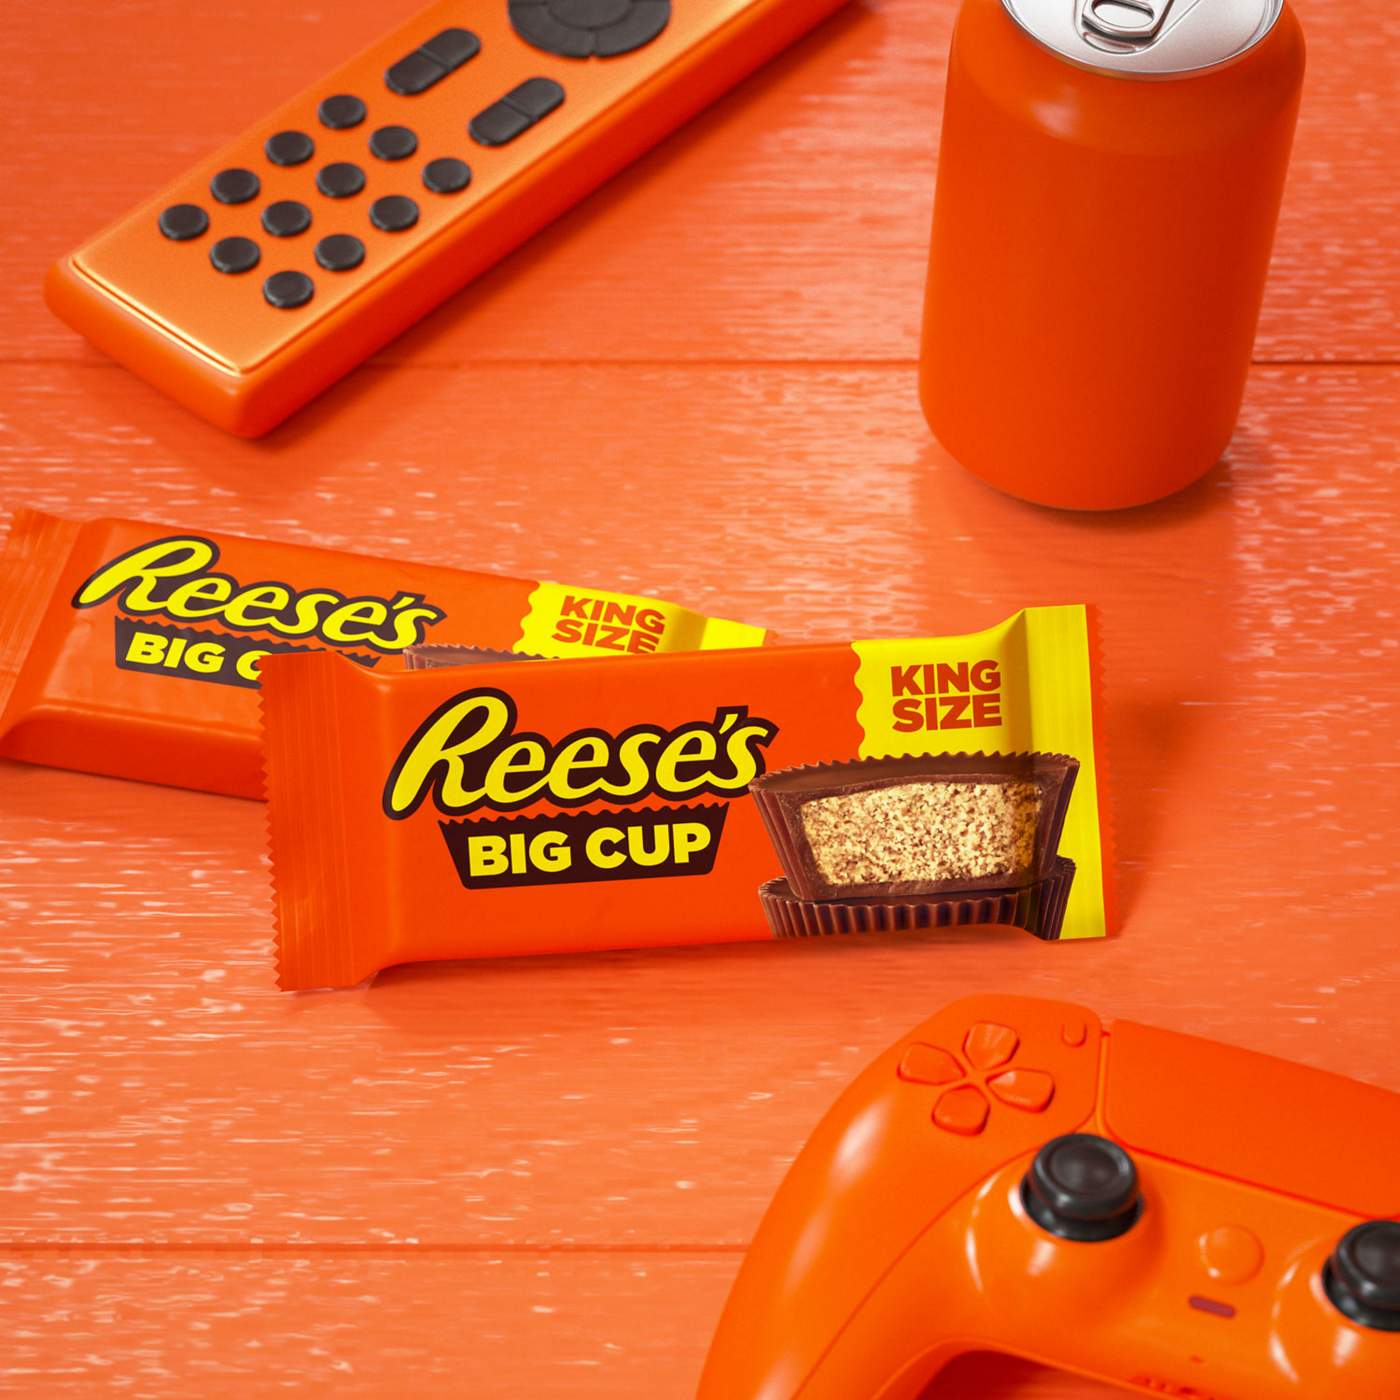 Reese's Big Cup Milk Chocolate Peanut Butter Candy - King Size; image 2 of 5